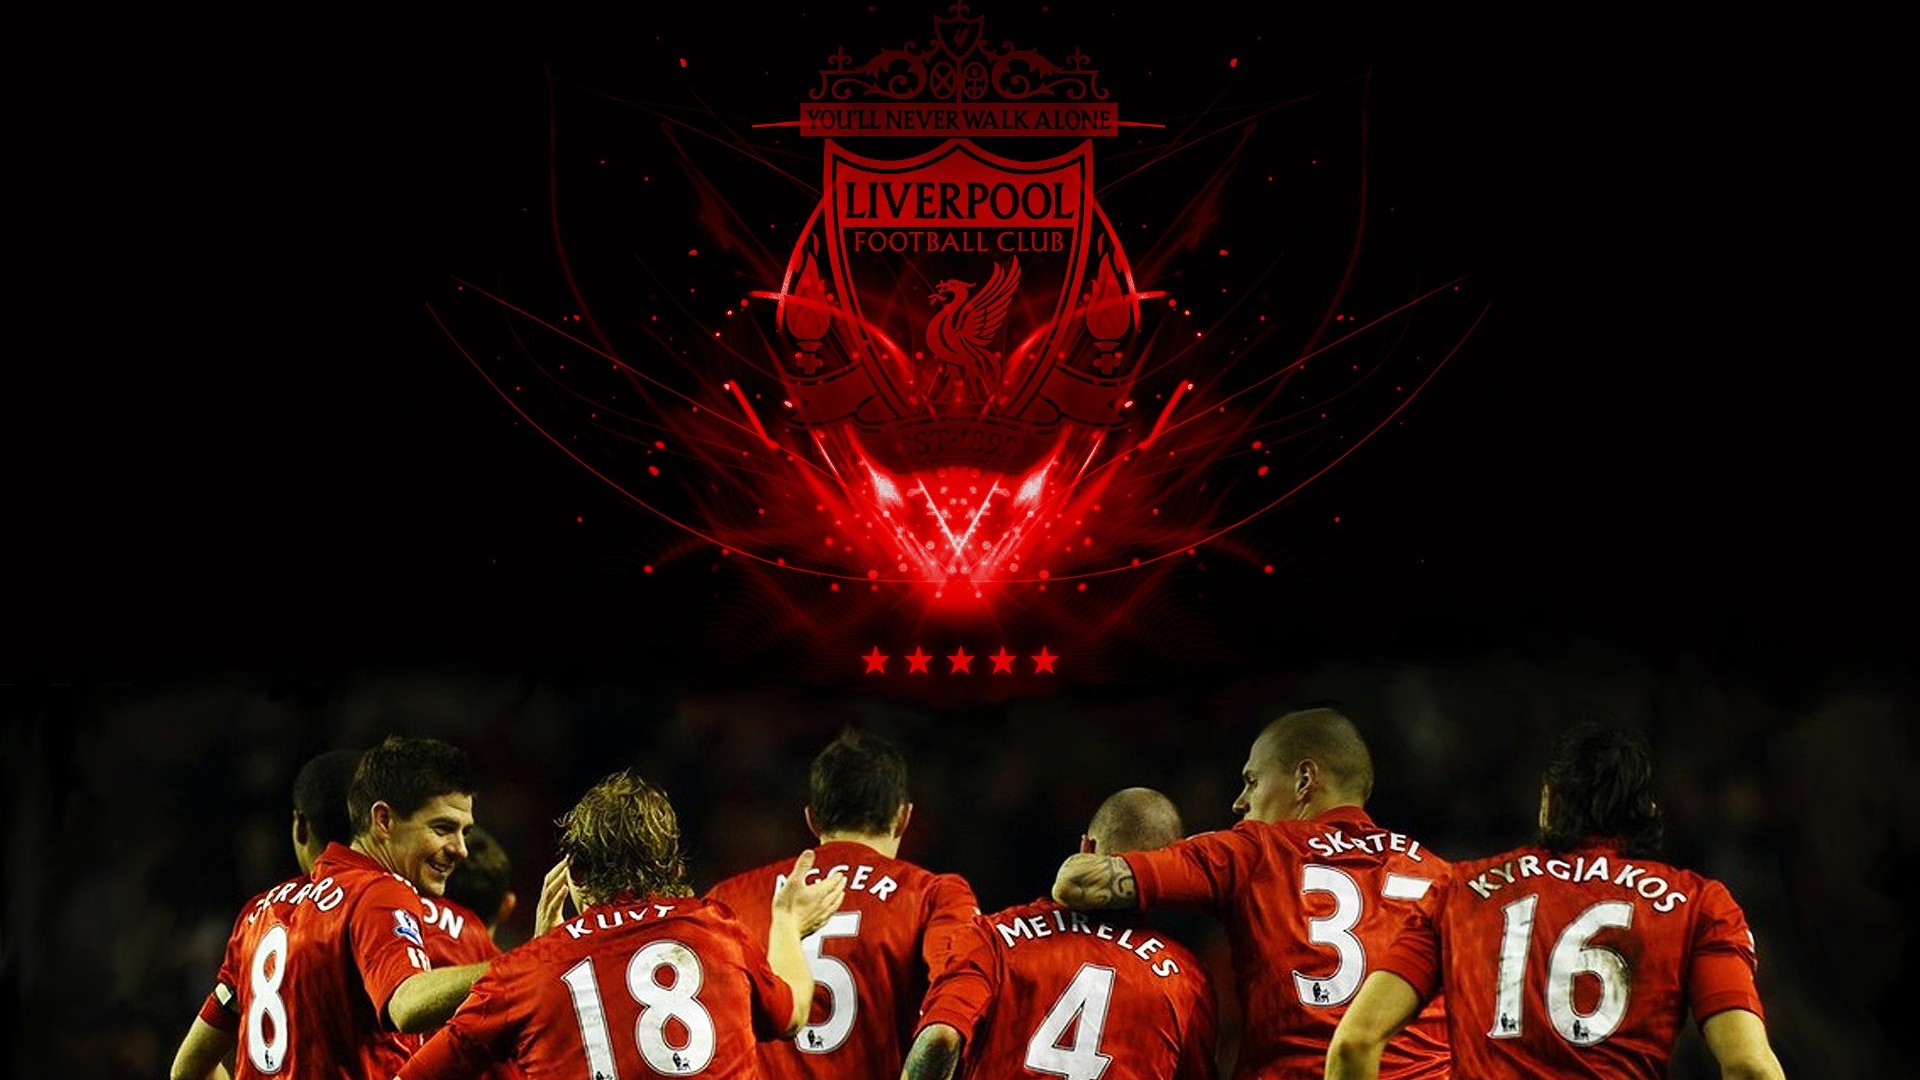 Wallpaper Liverpool HD with high-resolution 1920x1080 pixel. You can use this wallpaper for your Desktop Computer Backgrounds, Mac Wallpapers, Android Lock screen or iPhone Screensavers and another smartphone device